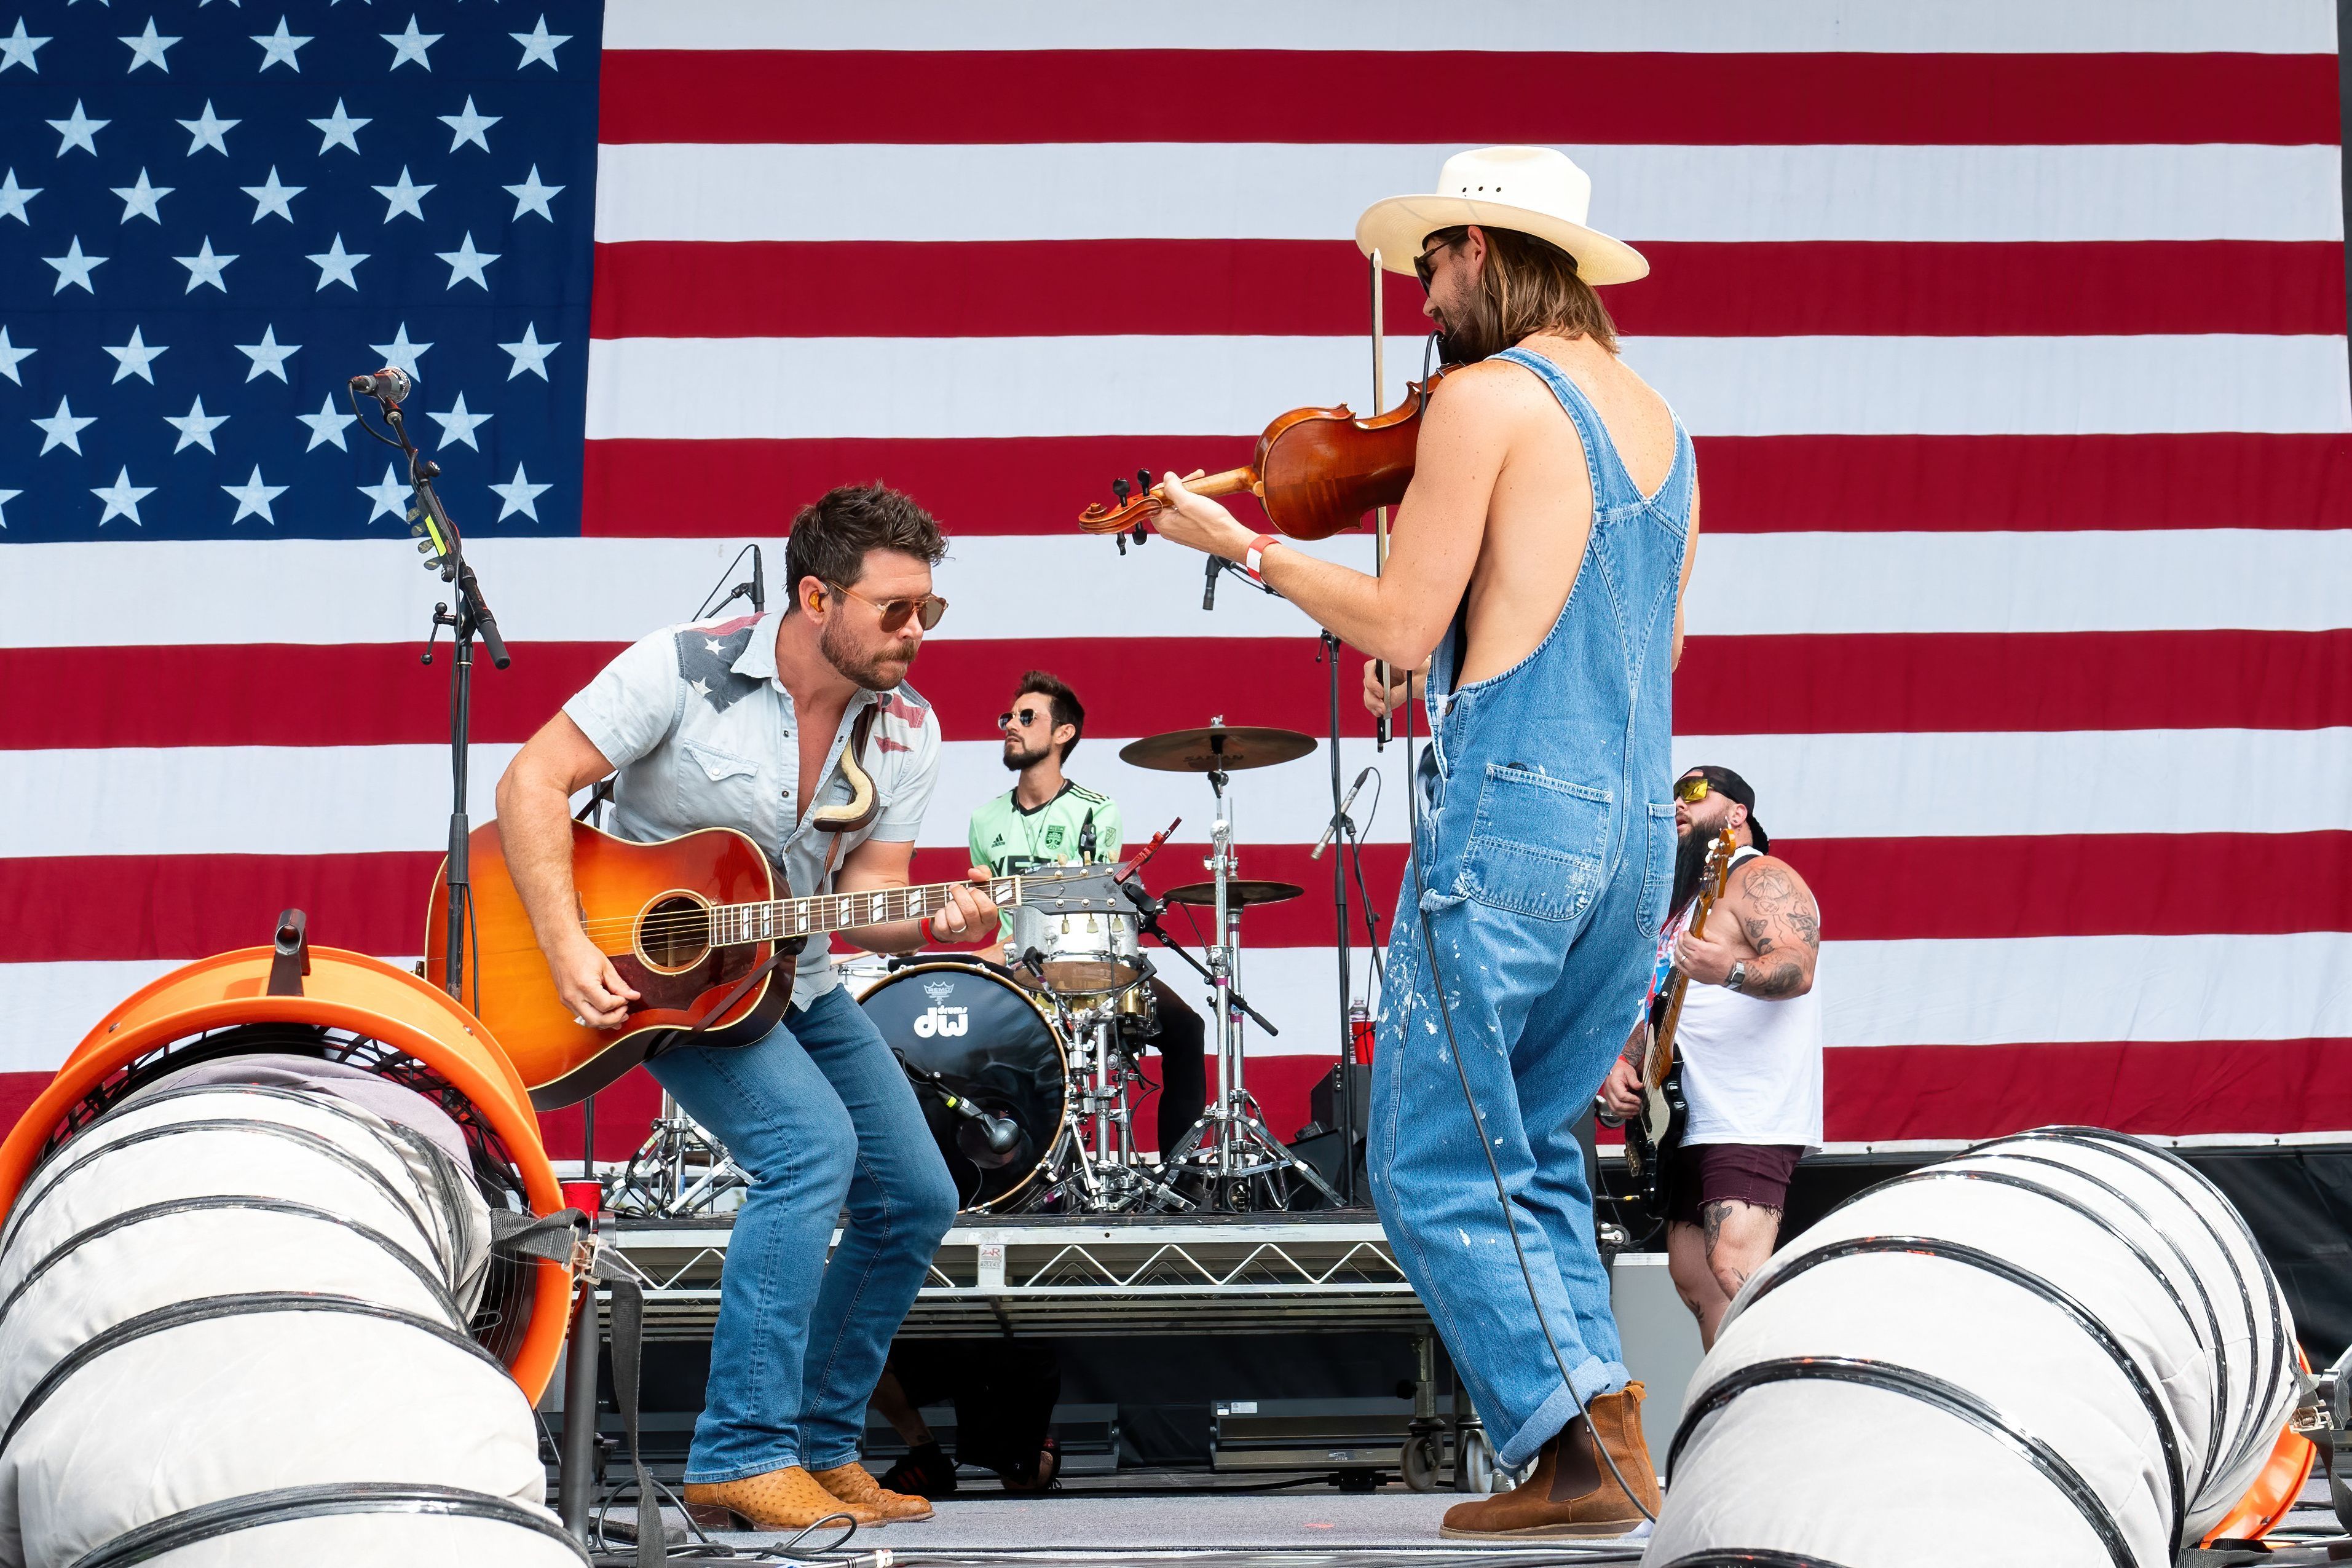 Shane Smith & The Saints perform on stage during Willie Nelson's 4th of July picnic and fireworks show at Q2 Stadium in Austin, Texas, on July 4, 2023. The annual Independence Day event, created by US country musician Willie Nelson, is celebrating its 50th anniversary.